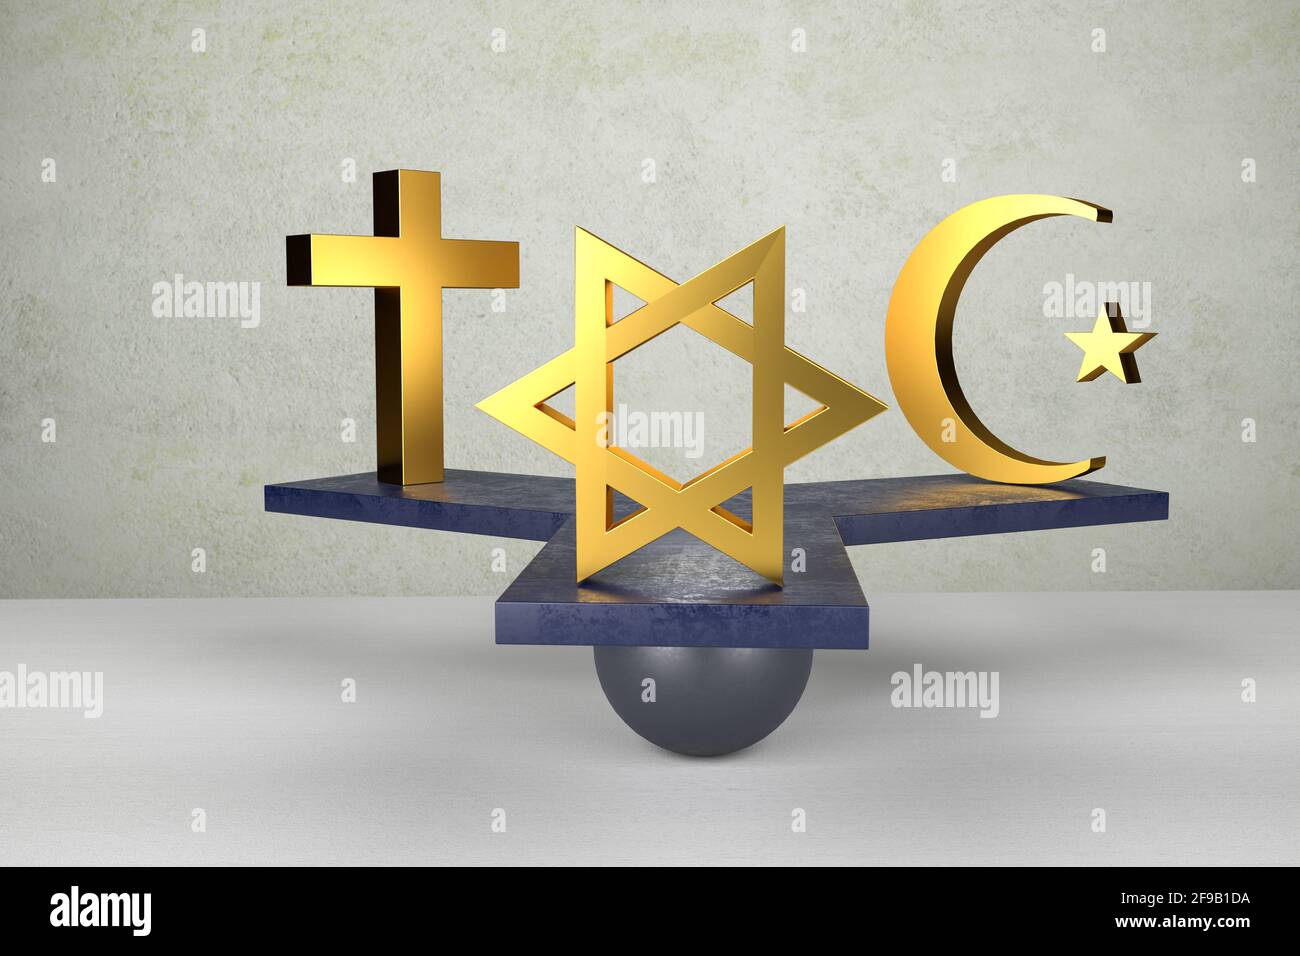 Equal rights concept: Equality of religions. A christian cross, a jewish star of david and an islamic star and crescent symbol on a threeway seesaw on Stock Photo